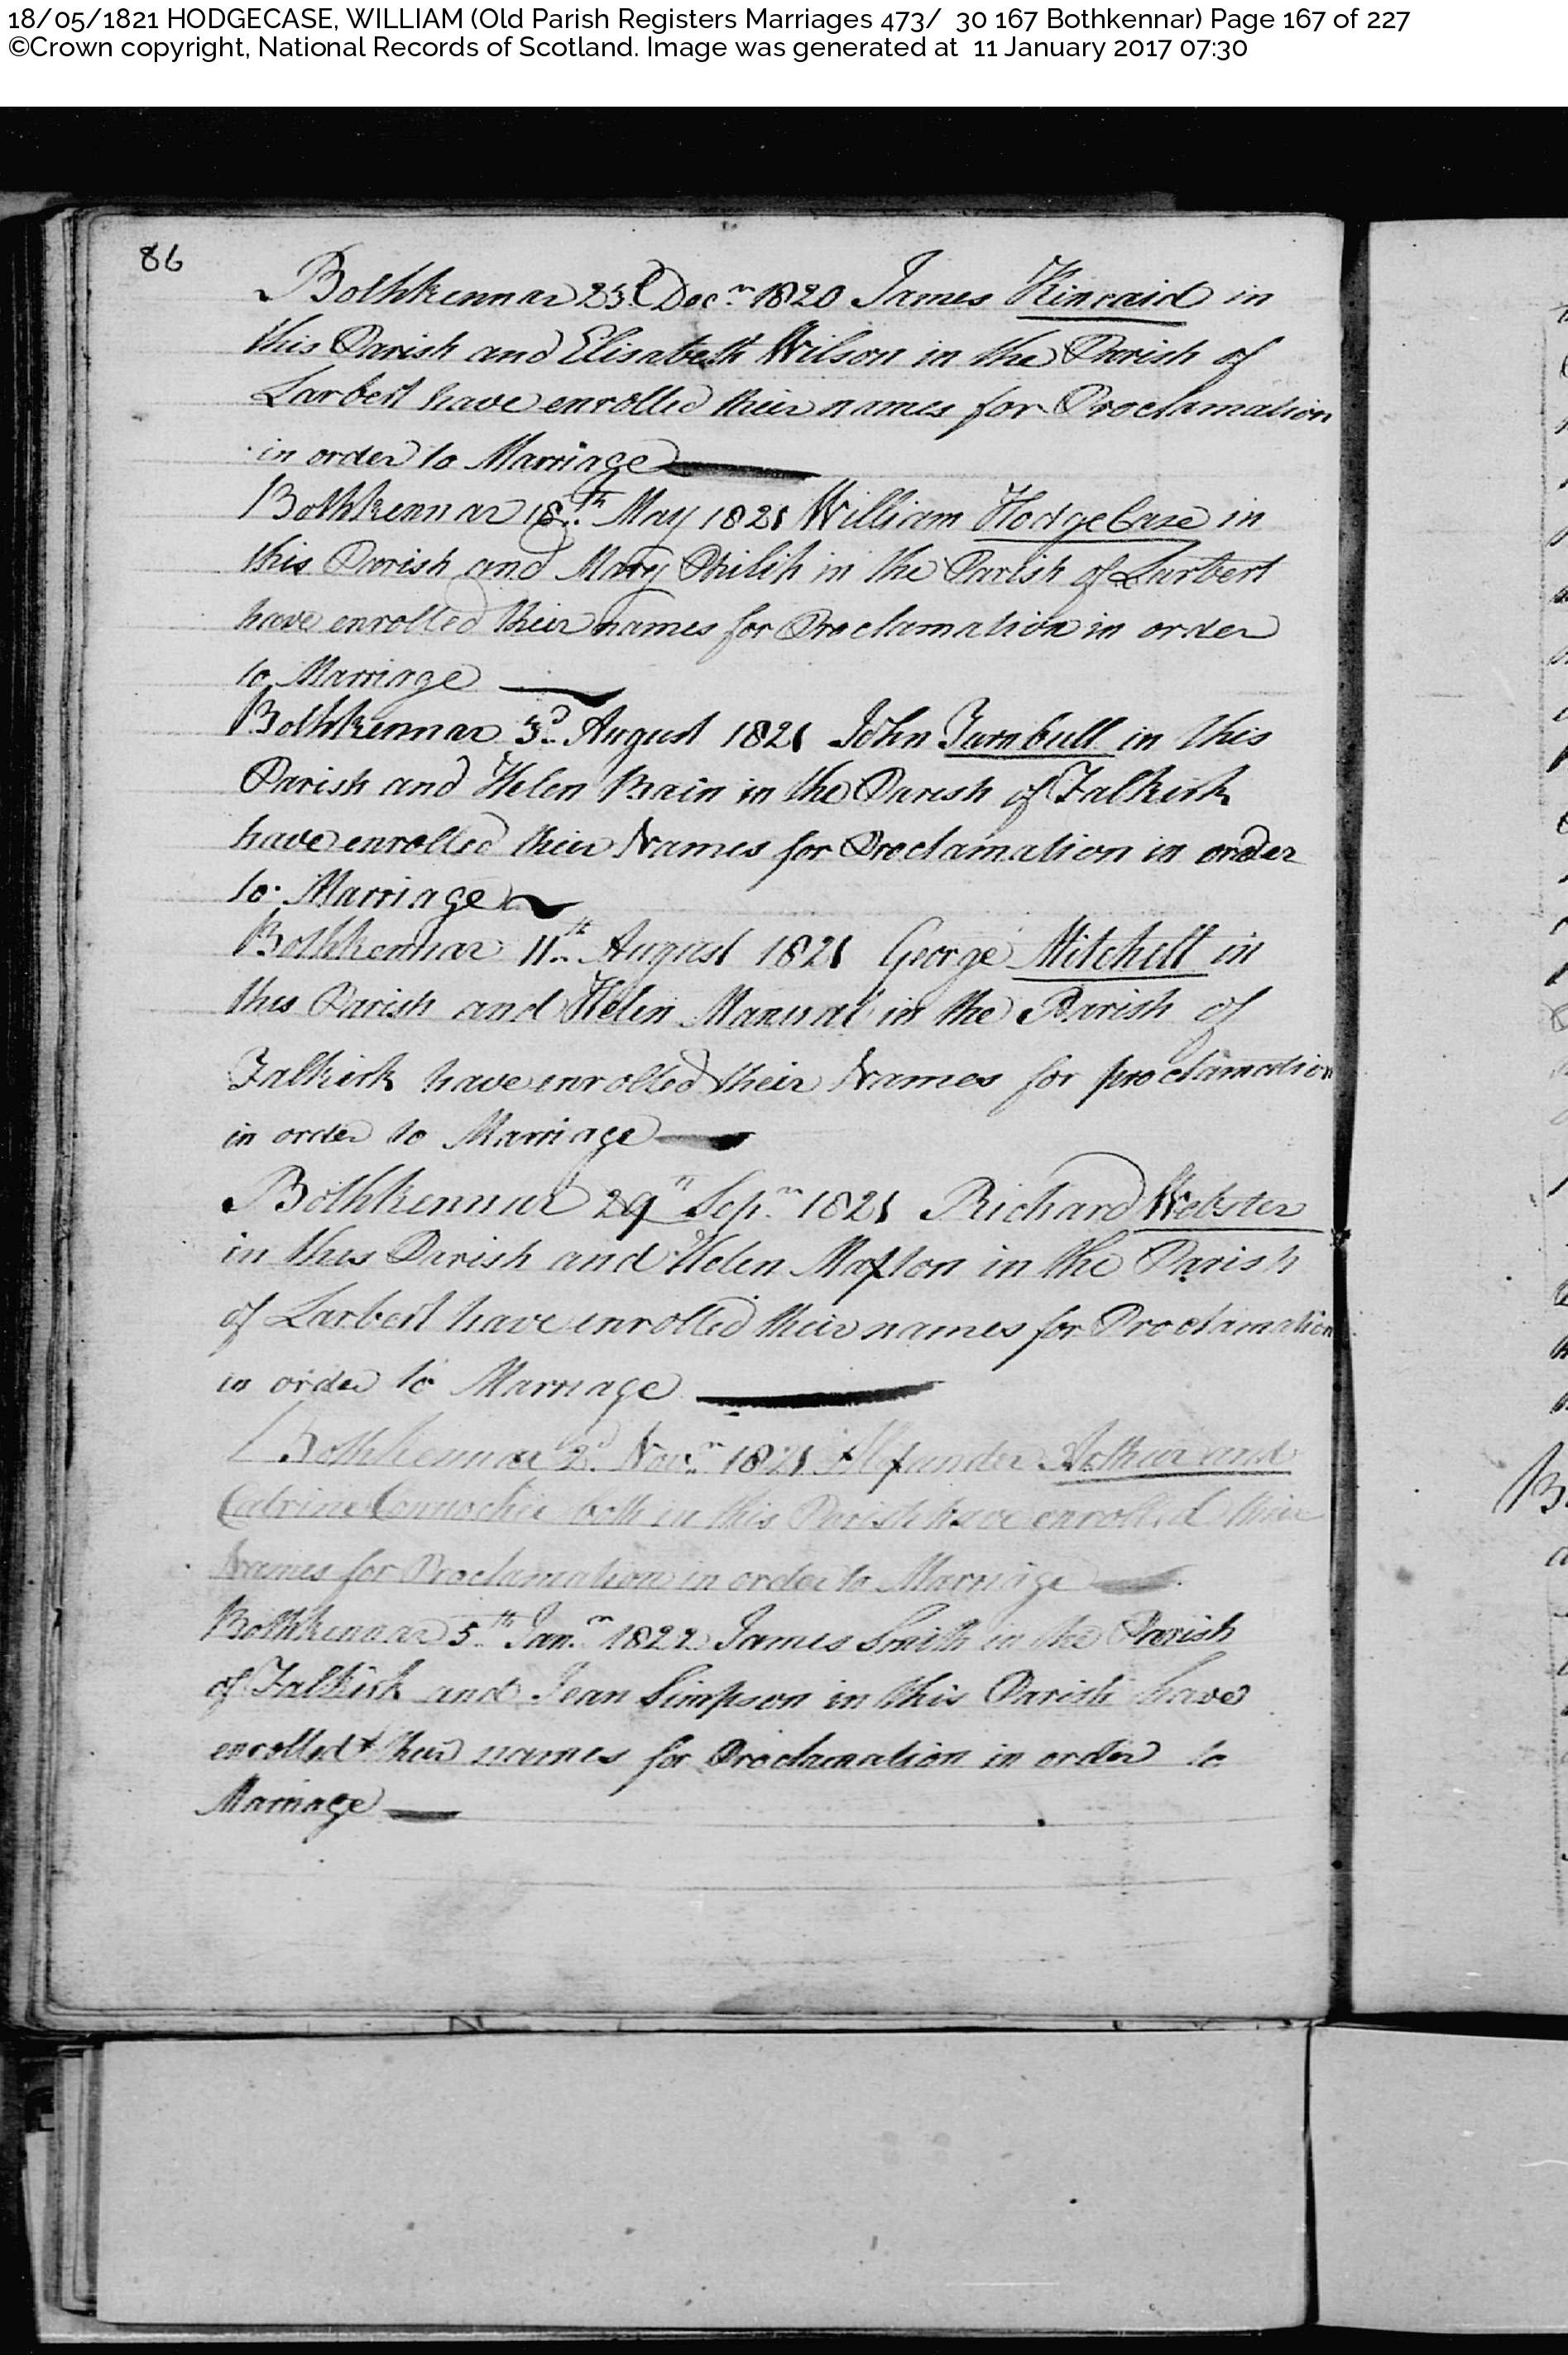 William Hodgecase and Mary Philip Marriage Cert ScotlandsPeople 1821, May 18, 1821, Linked To: <a href='i967.html' >William Hotchkiss</a> and <a href='i708.html' >Mary Philip</a>